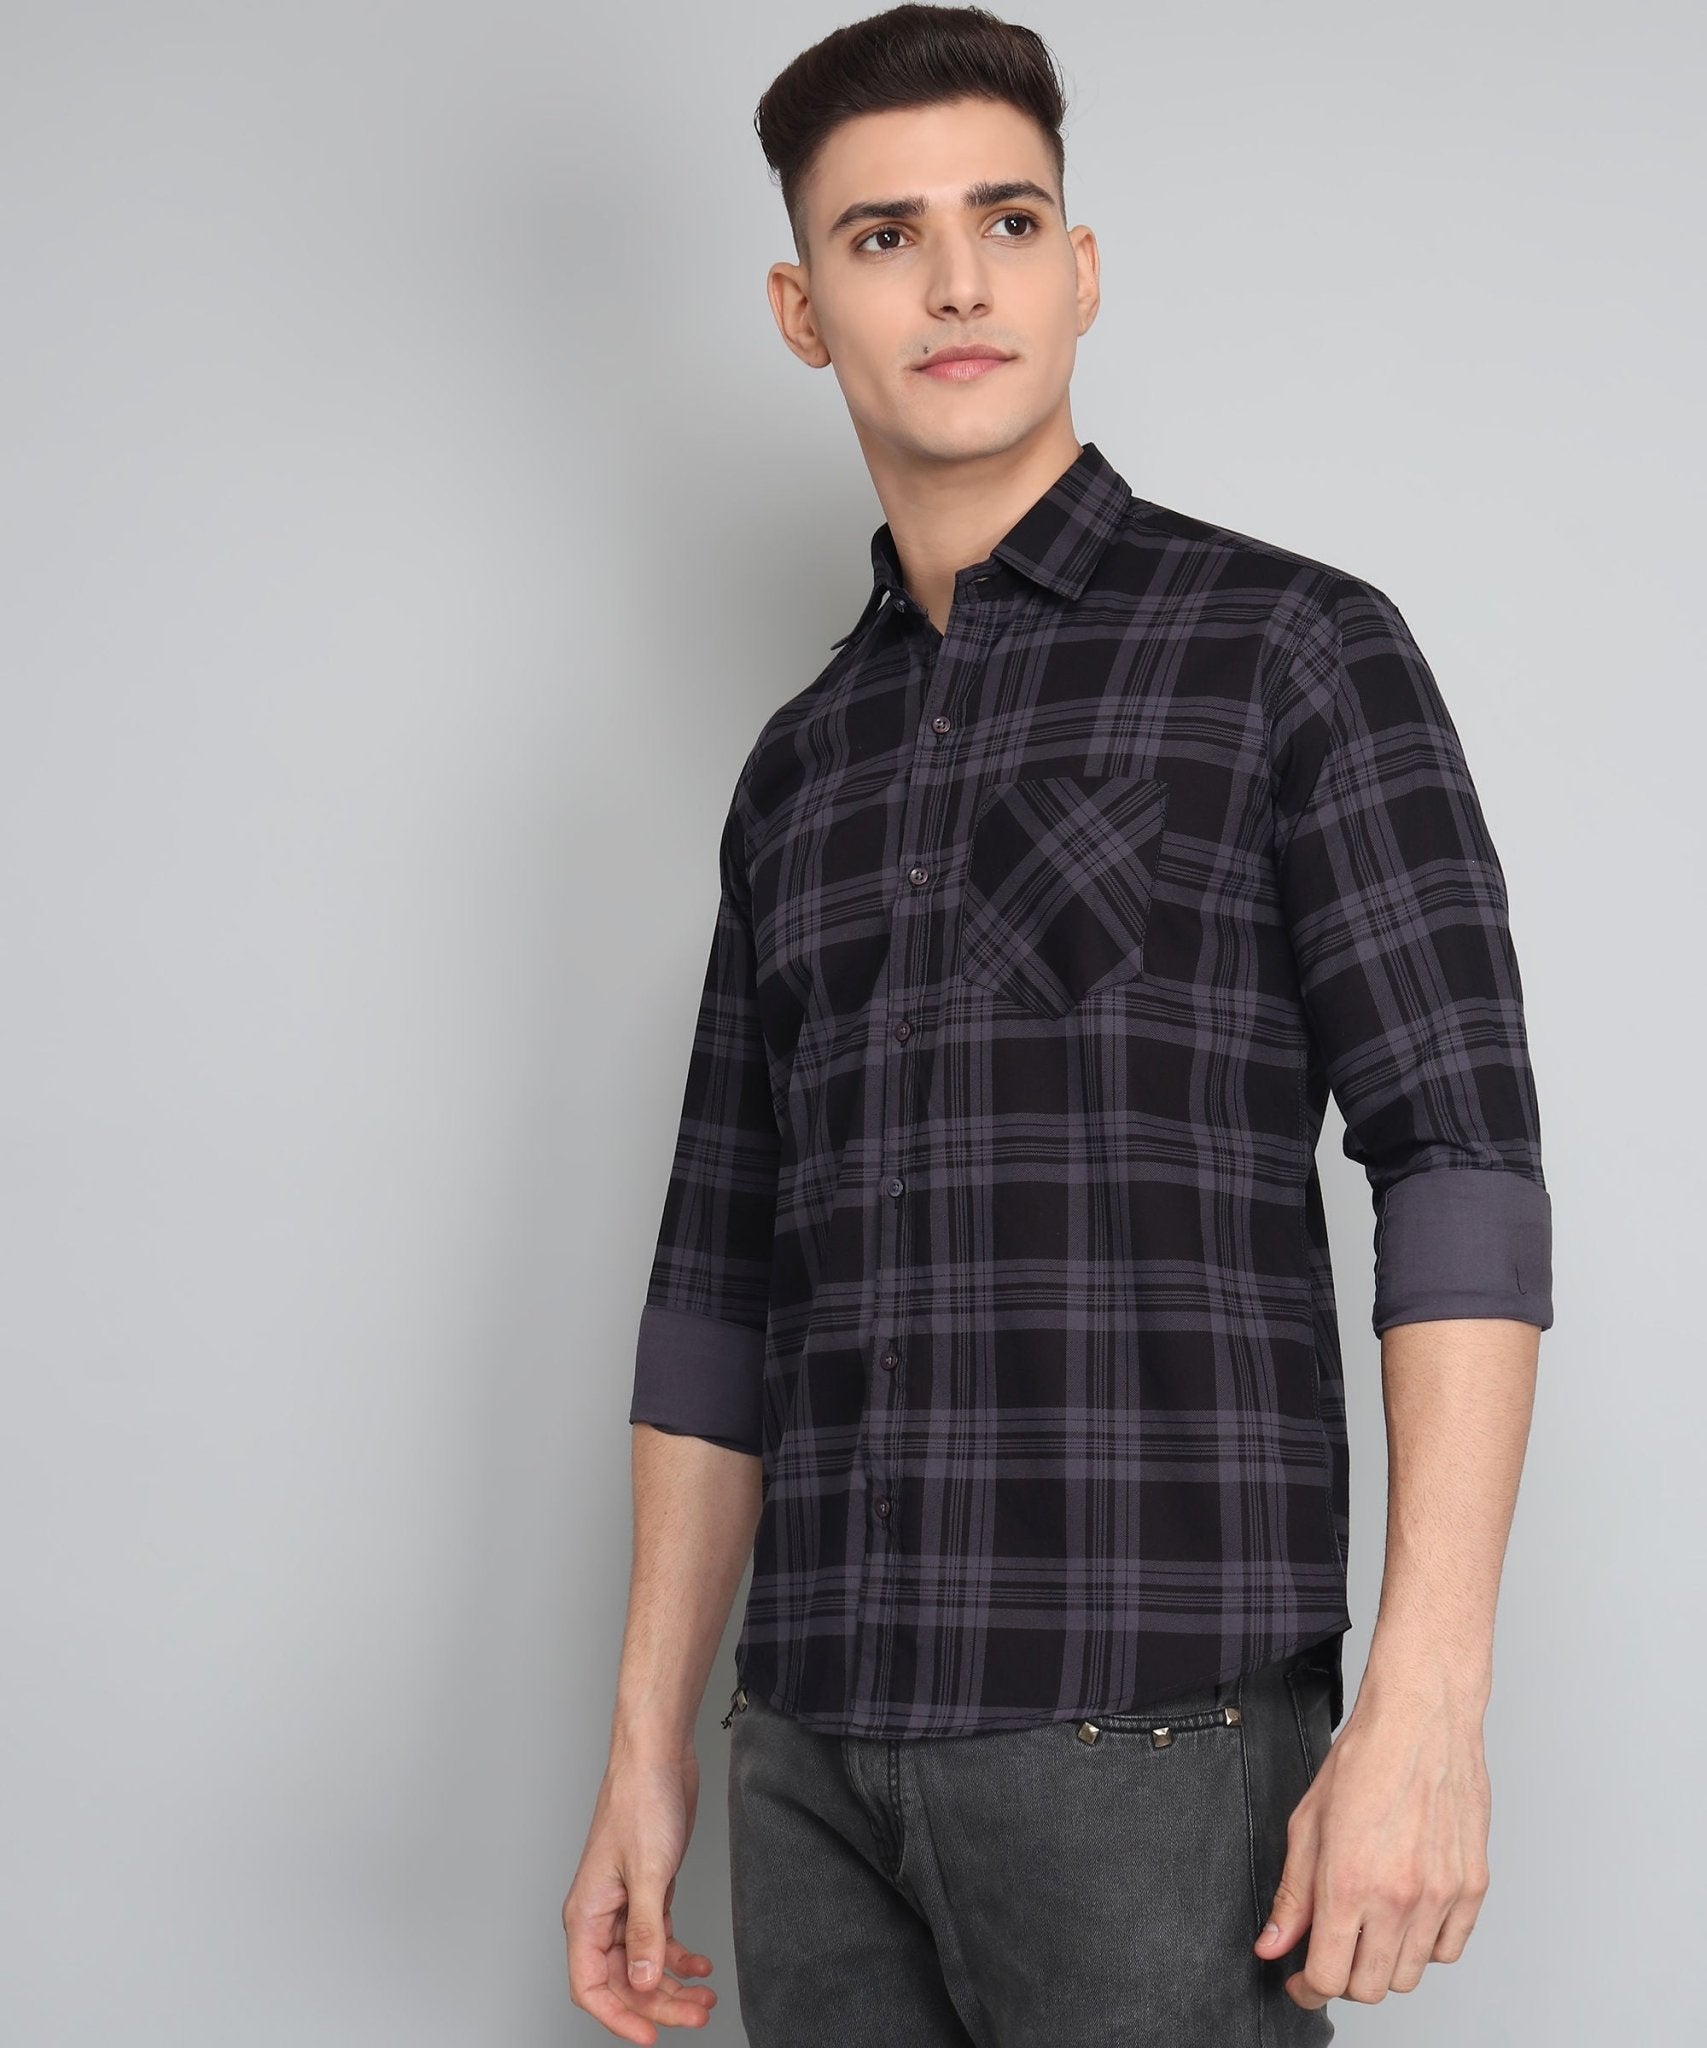 Exclusive TryBuy Premium Black Grey Check Cotton Casual Shirt for Men - TryBuy® USA🇺🇸